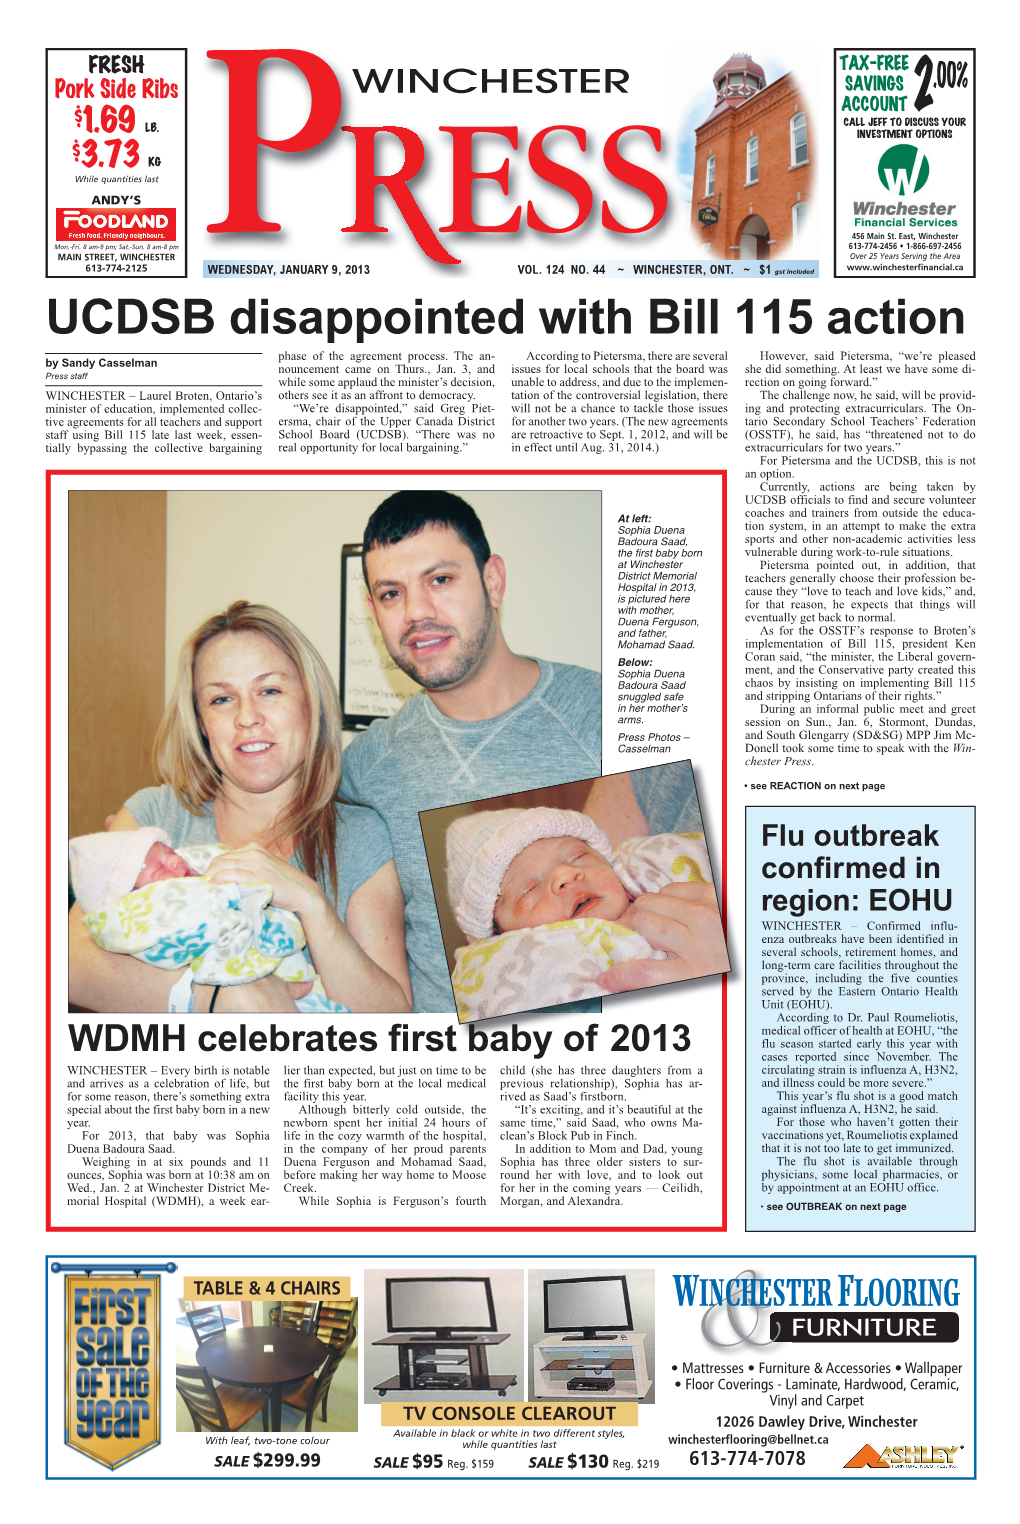 UCDSB Disappointed with Bill 115 Action Phase of the Agreement Process